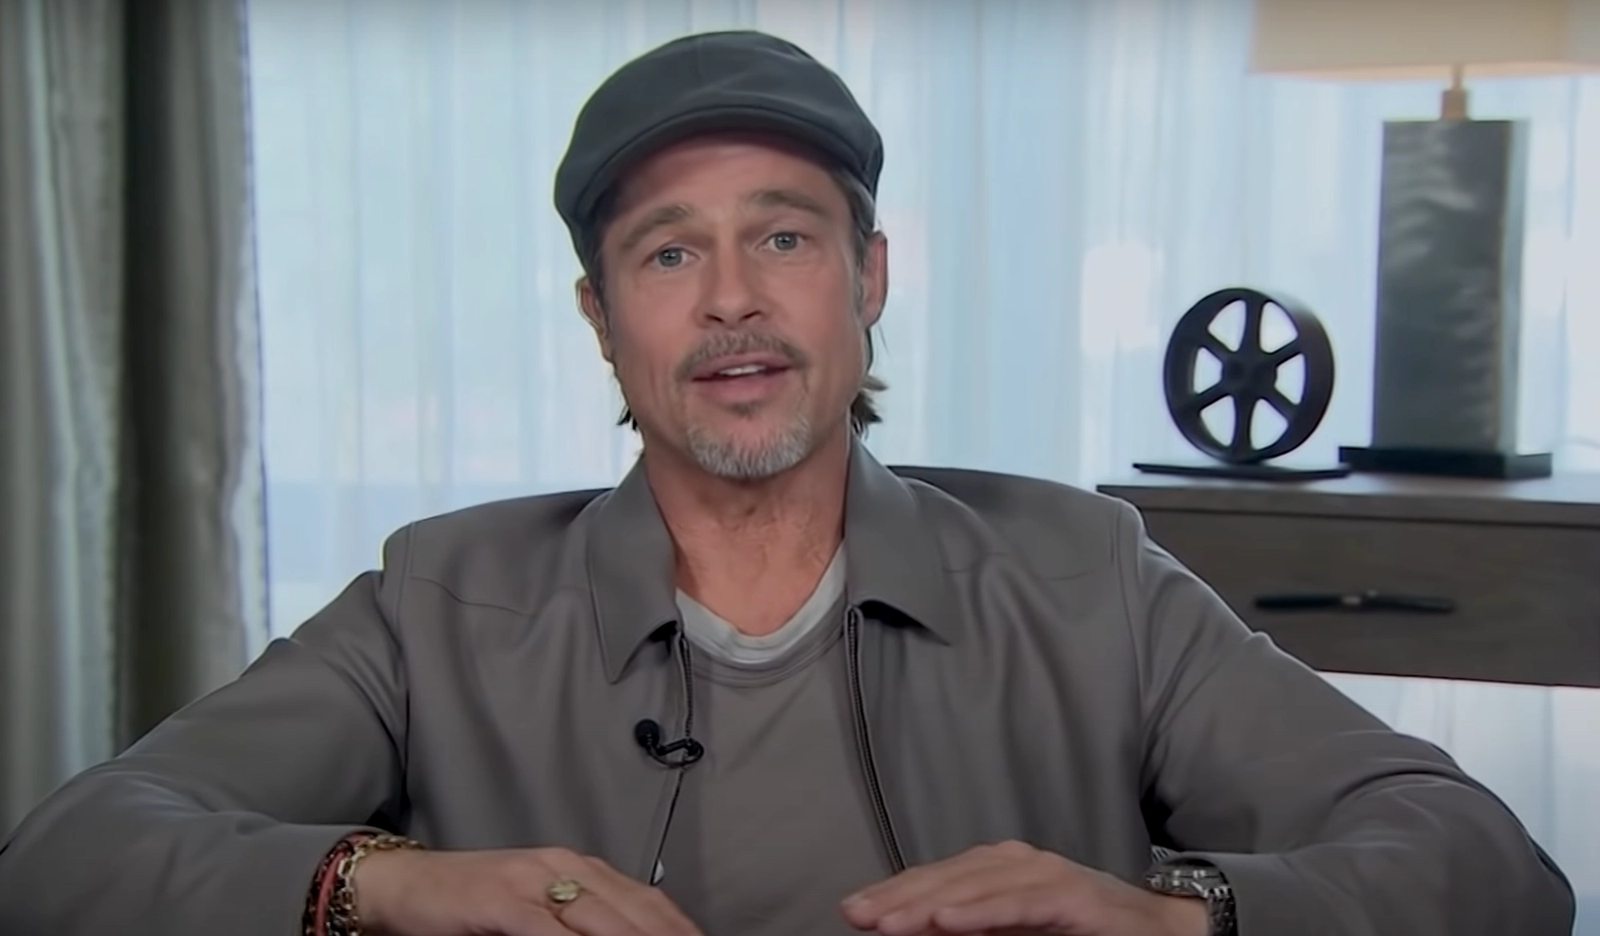 brad-pitt-requires-girls-to-sign-nondisclosure-agreement-before-first-date-angelina-jolies-ex-reportedly-avoids-dating-a-list-celebs-amid-messy-court-battles